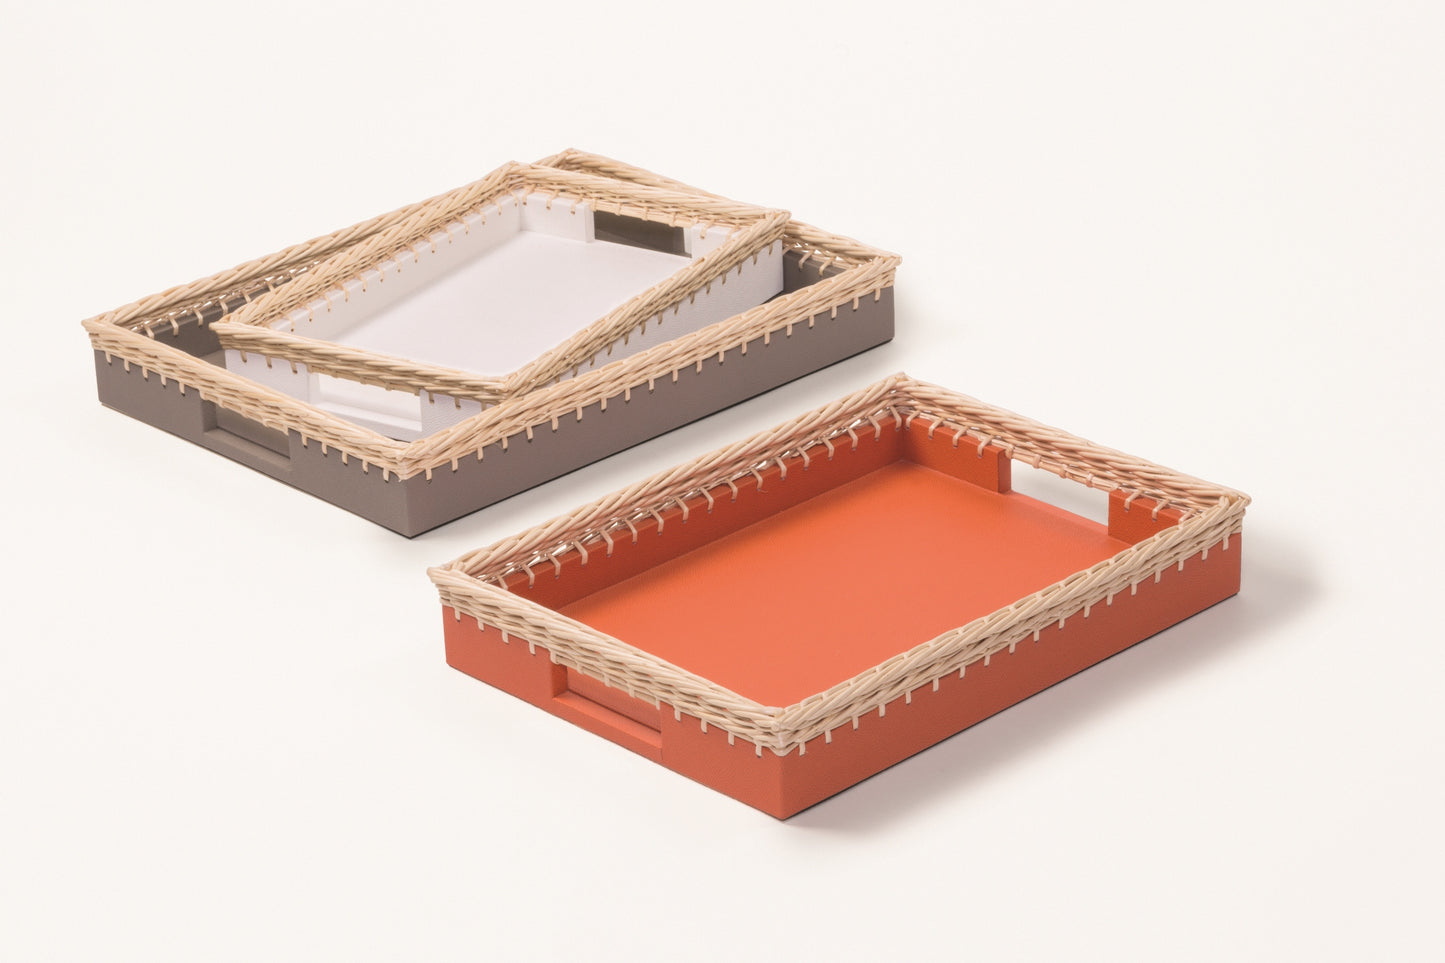 Giverny Tray by Pigment France | Leather-bound wooden structure enriched with a woven fine willow frame | Home Decor and Serveware | 2Jour Concierge, your luxury lifestyle shop